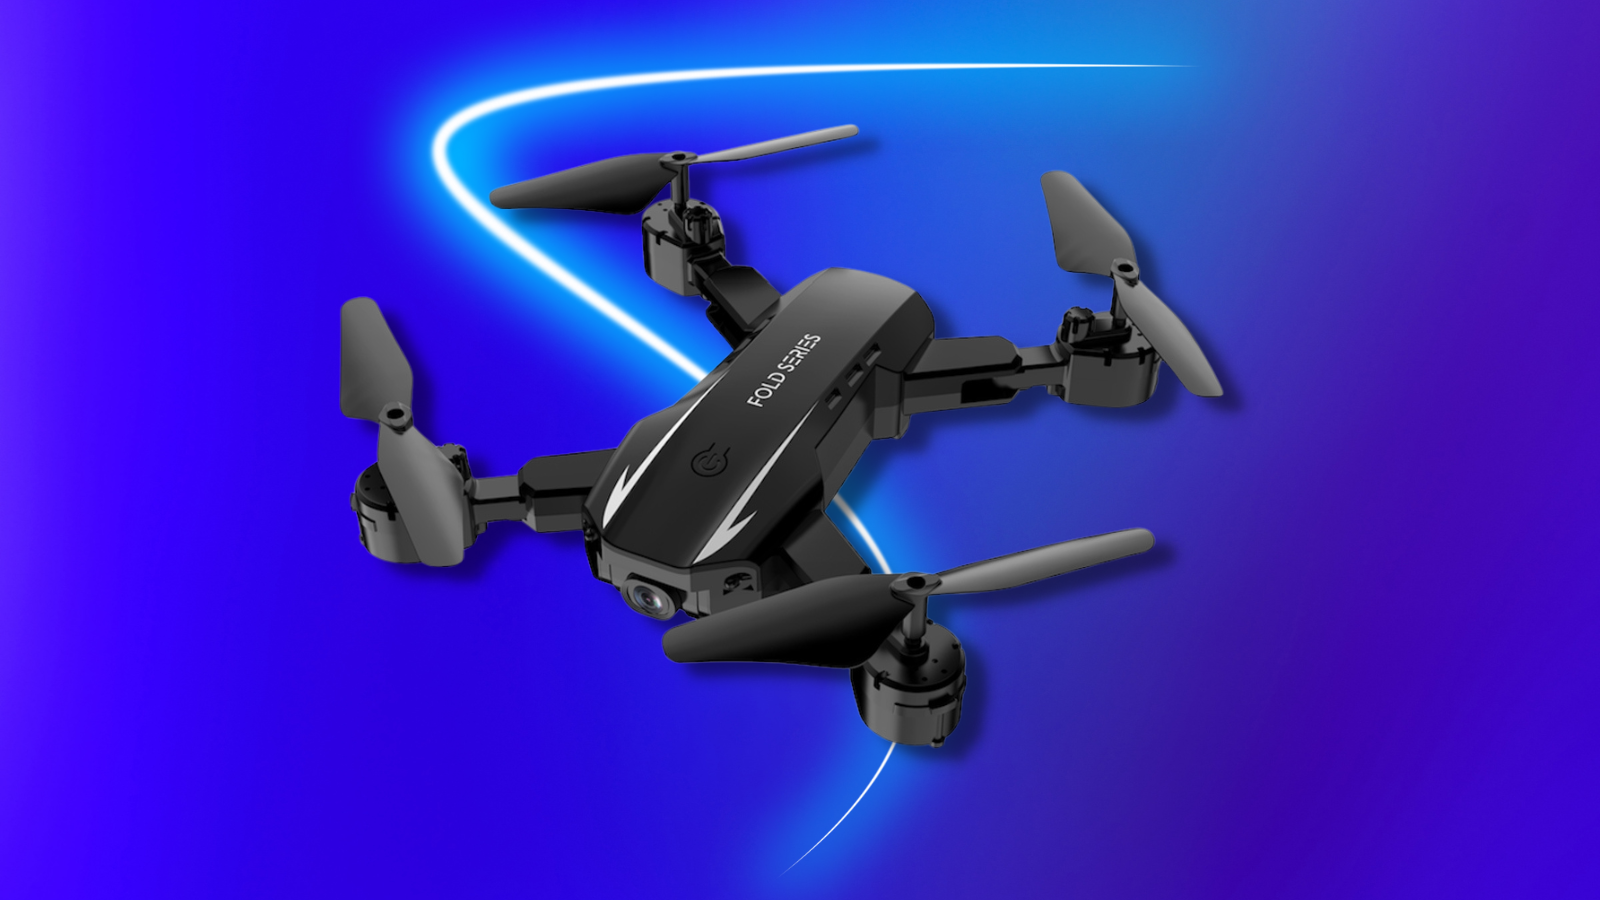 Ninja Dragons Blade X drone with blue background